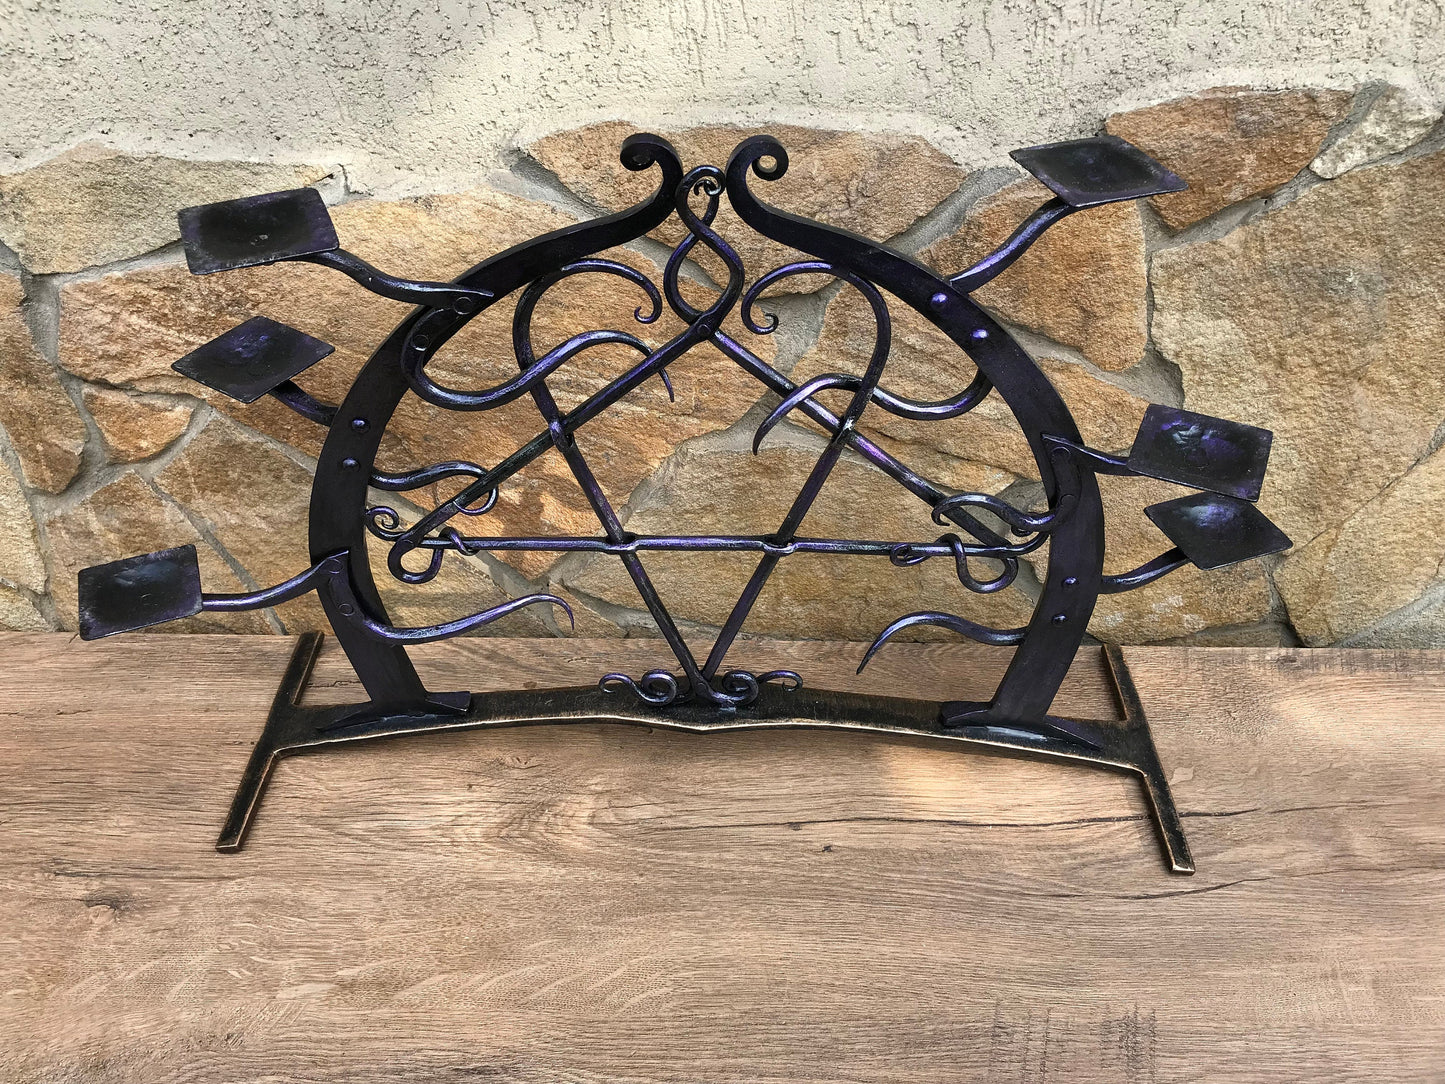 Iron anniversary gift for her,iron candle holder, iron anniversary gift for him, iron gift for her, hand forged candle holder, candle holder